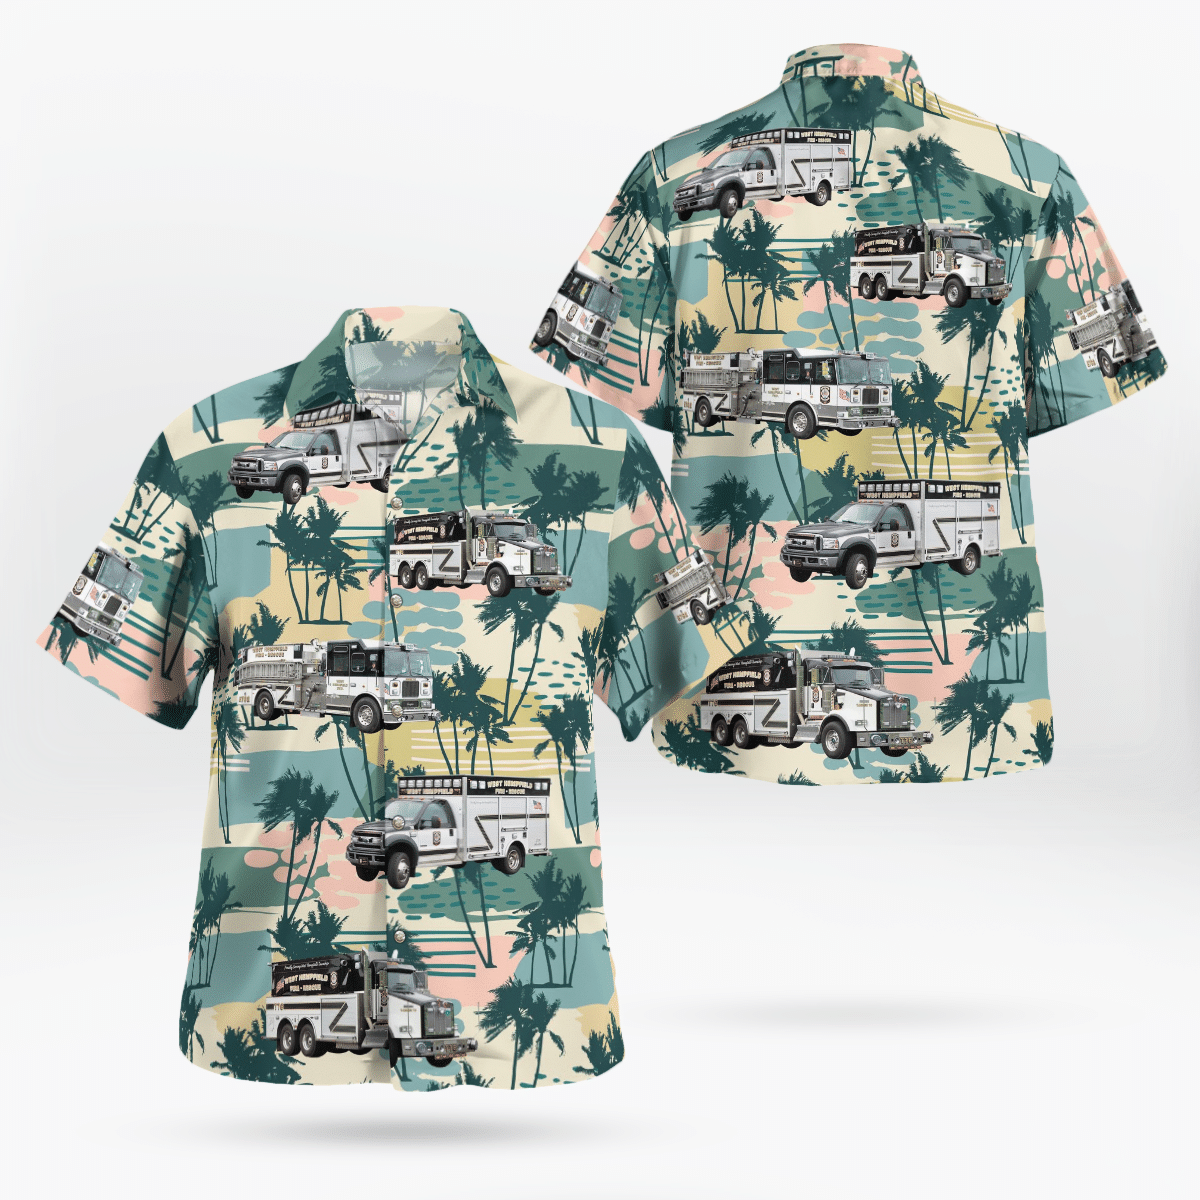 If you are in need of a new summertime look, pick up this Hawaiian shirt 183